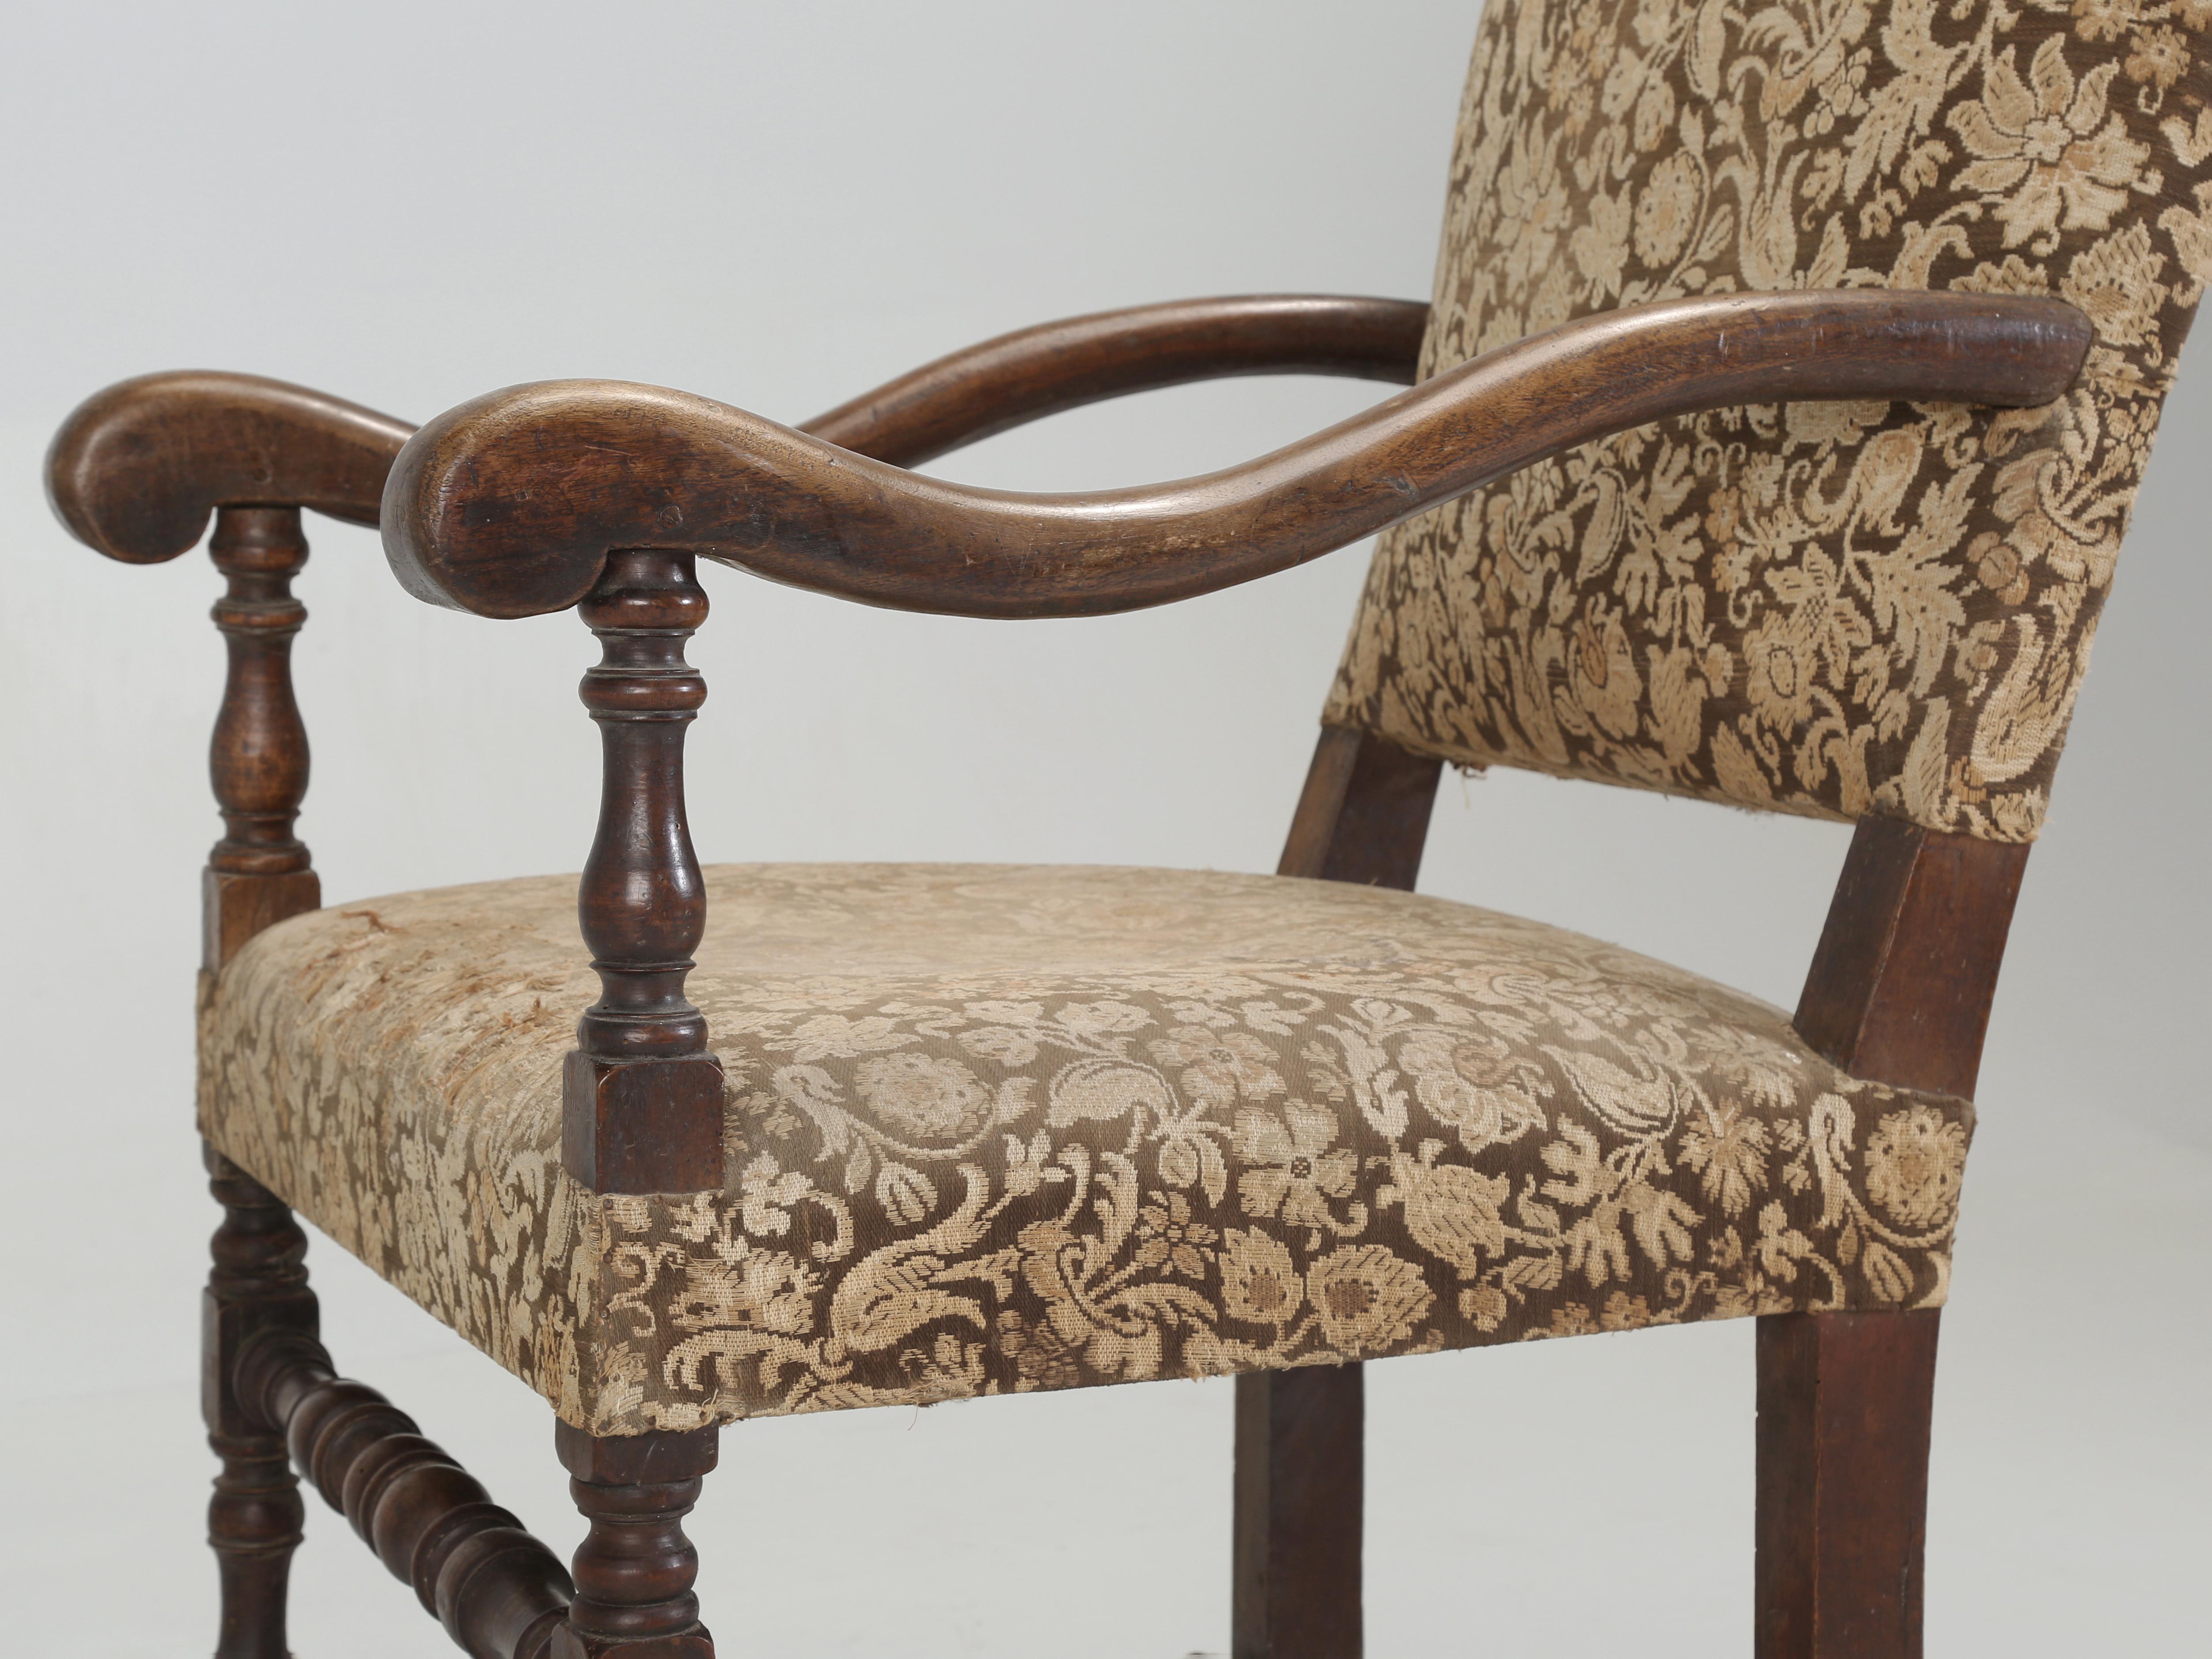 Upholstery Antique French Armchair or Throne Chair Over 100-Years Old Unrestored Condition